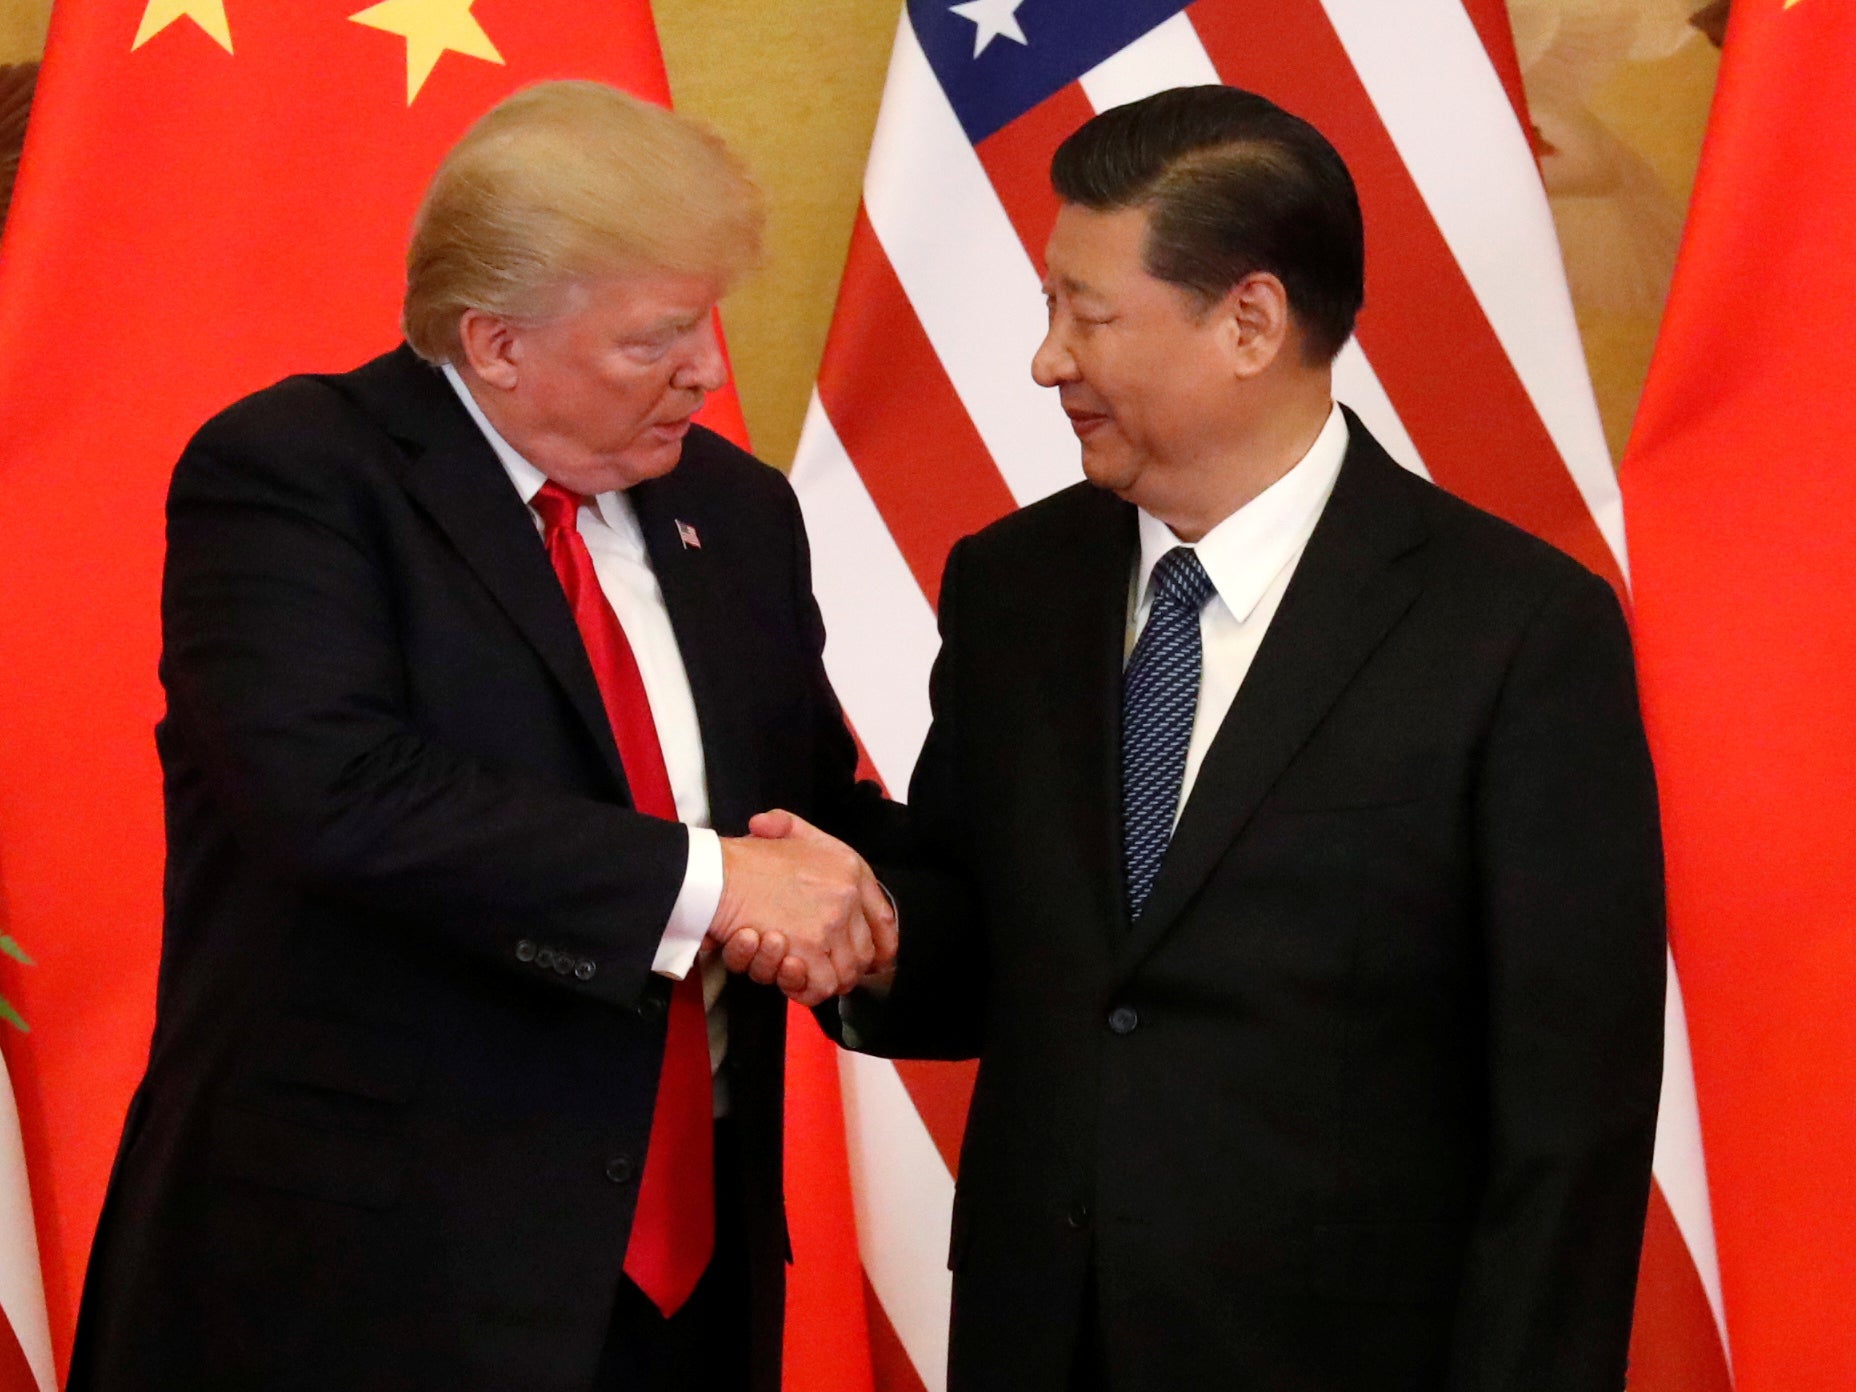 US President Donald Trump and China's President Xi Jinping make joint statements at the Great Hall of the People in Beijing